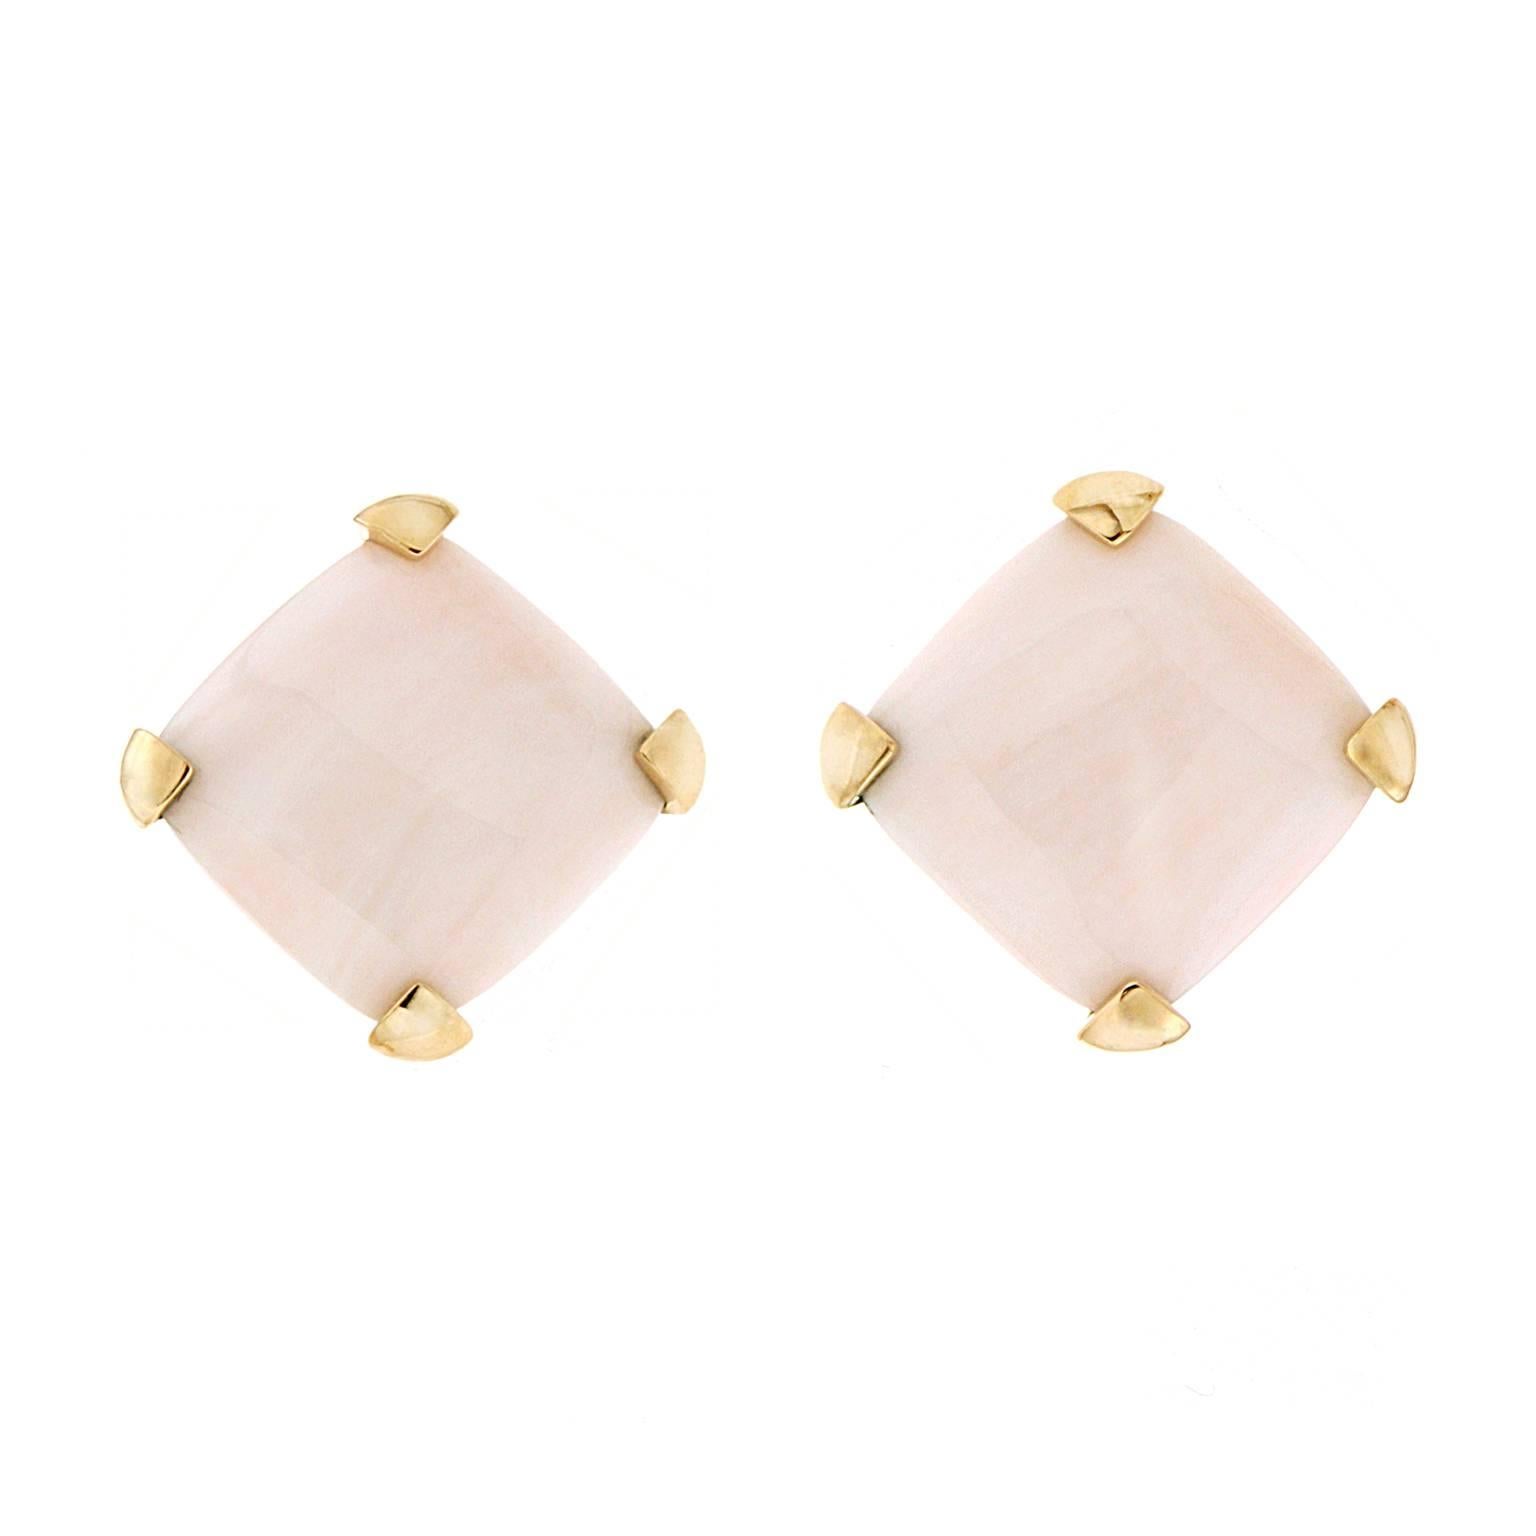 Valentin Magro Cushion White Coral Earrings 